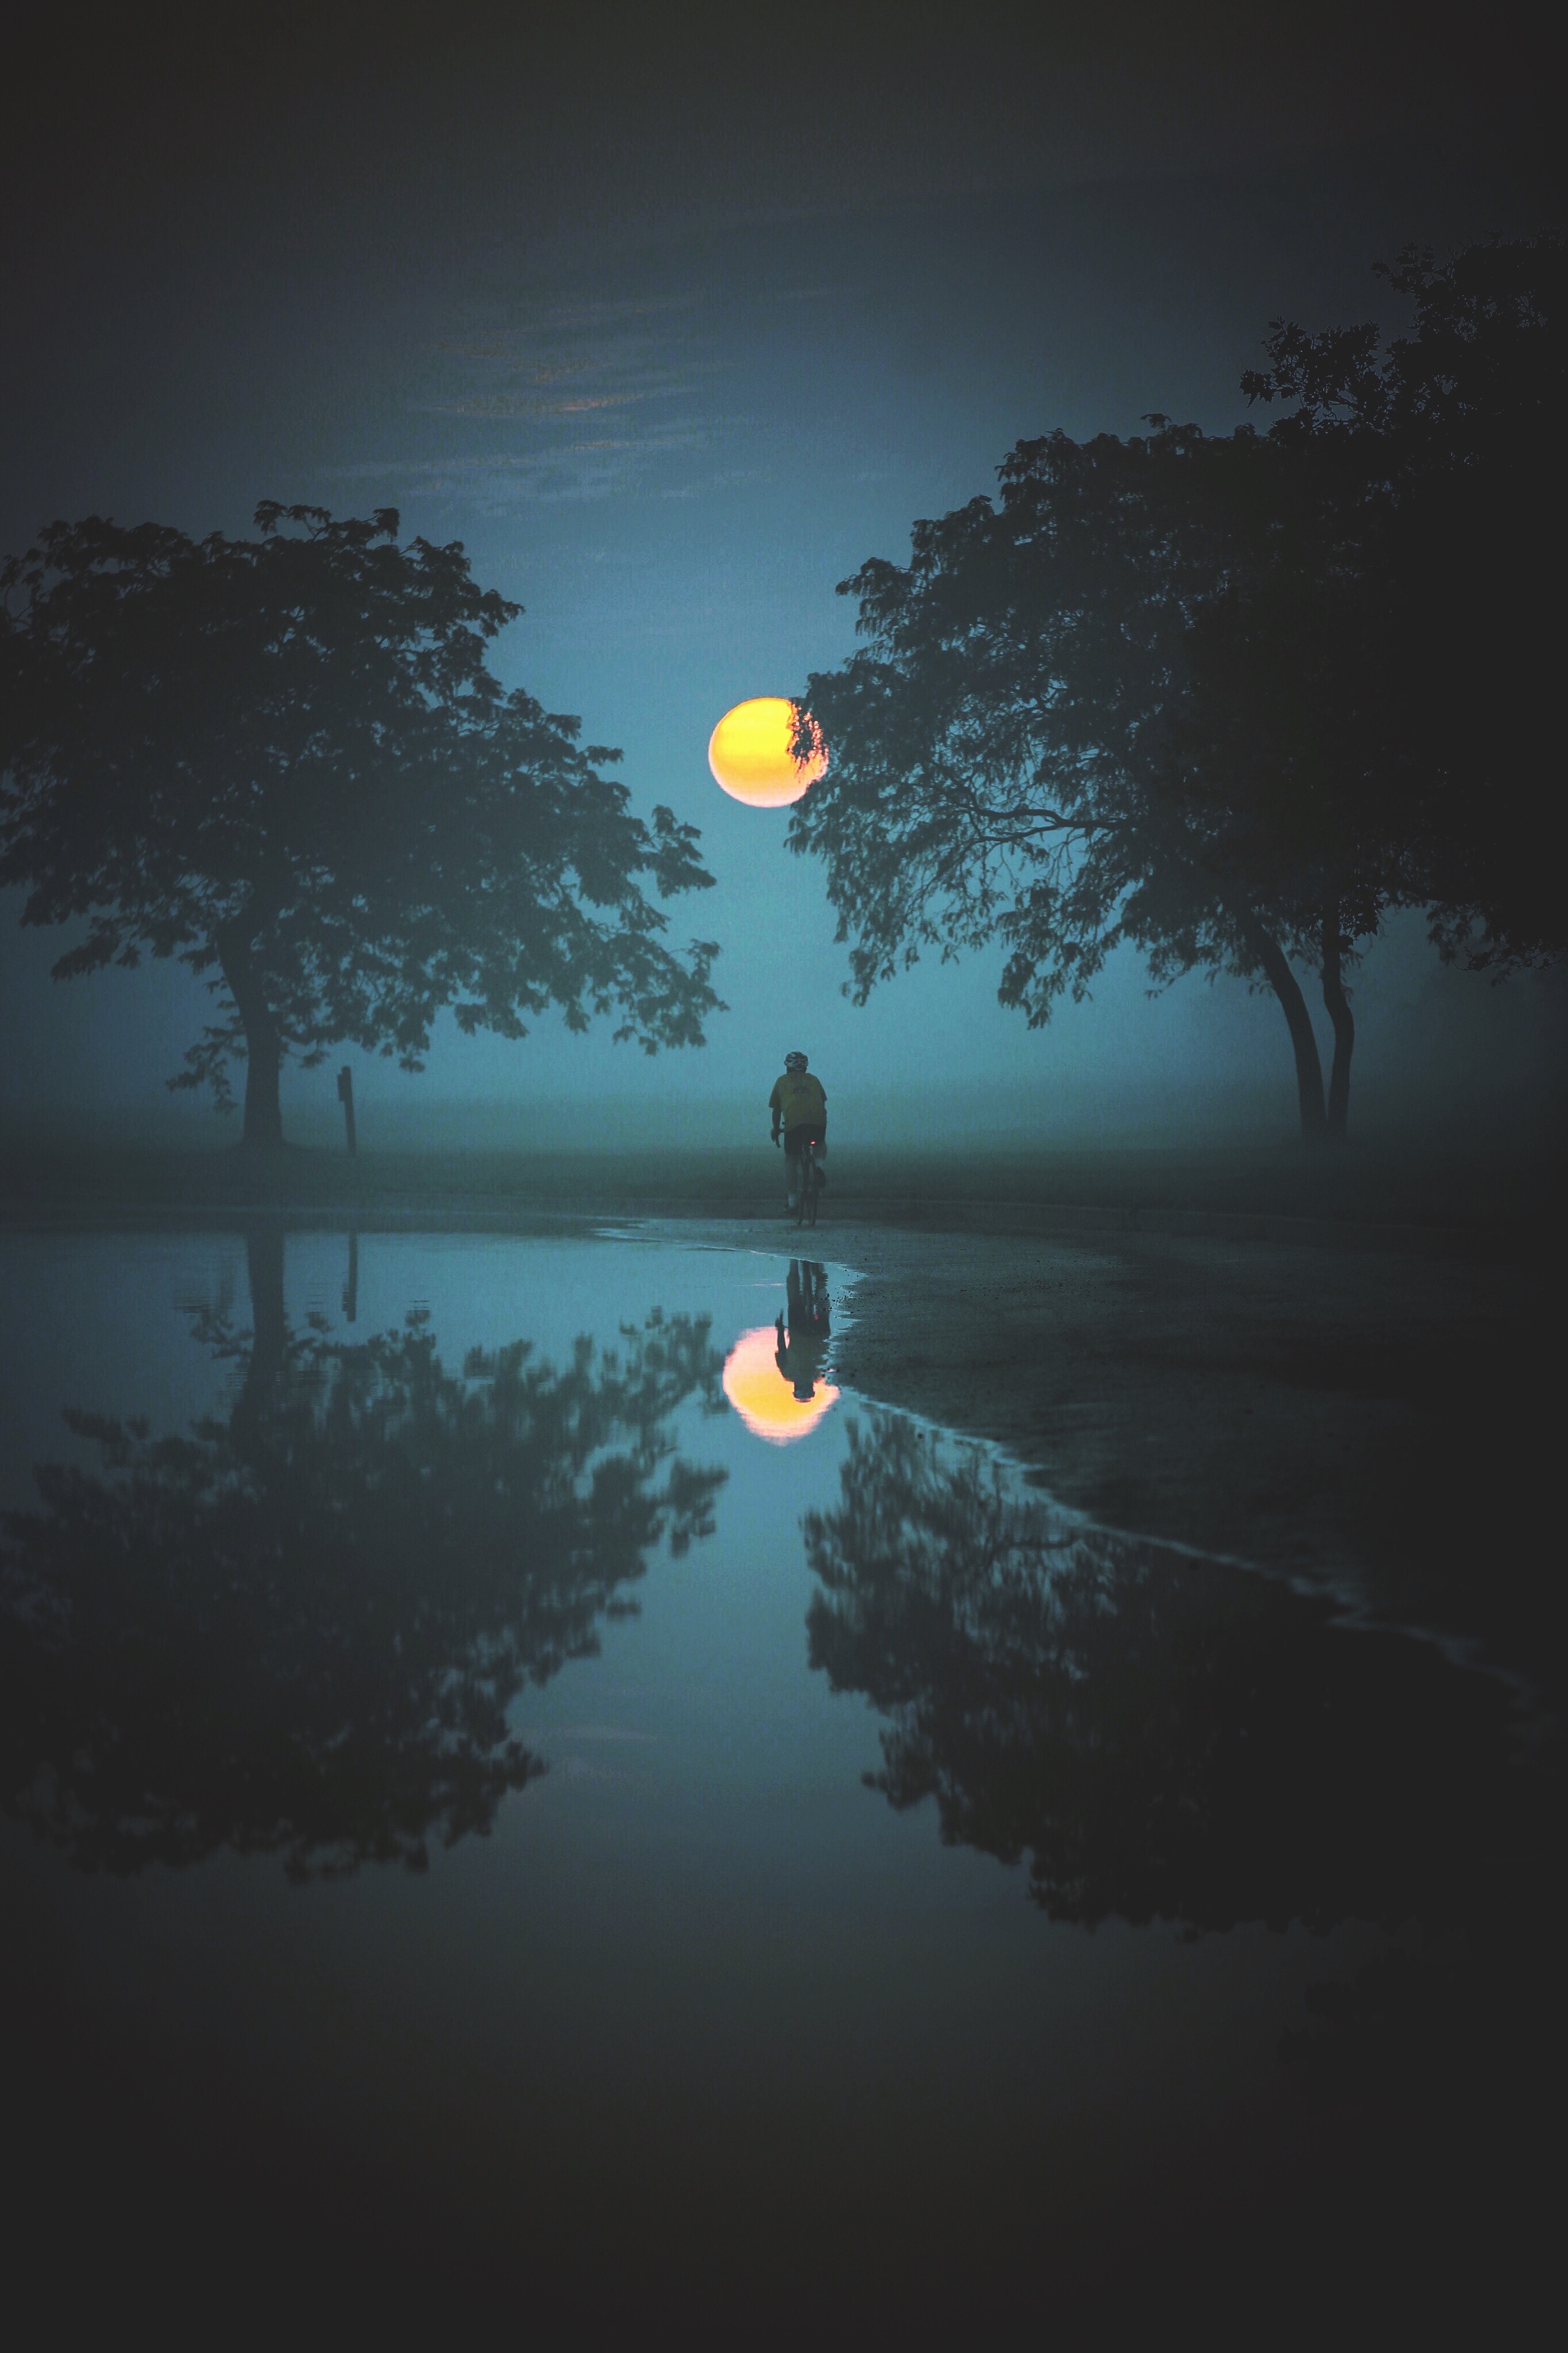 reflection, moon, cyclist, nature, water, trees, fog lock screen backgrounds